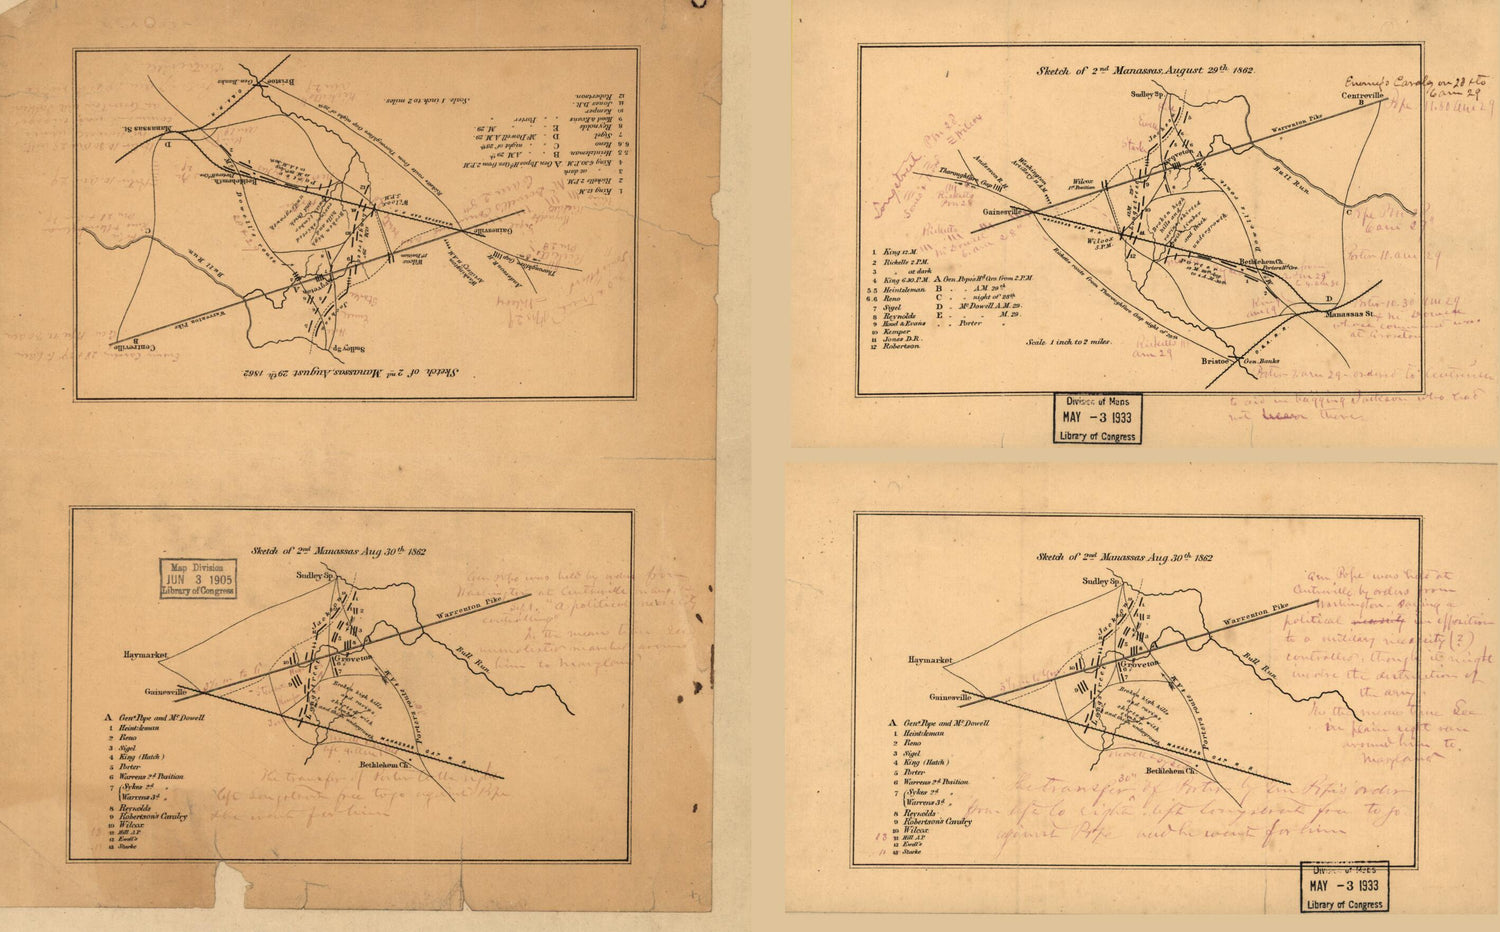 This old map of Sketch of 2nd Manassas, August 29th from 1862 ; Sketch of 2nd Manassas, Aug. 30th, from 1862 was created by  in 1862